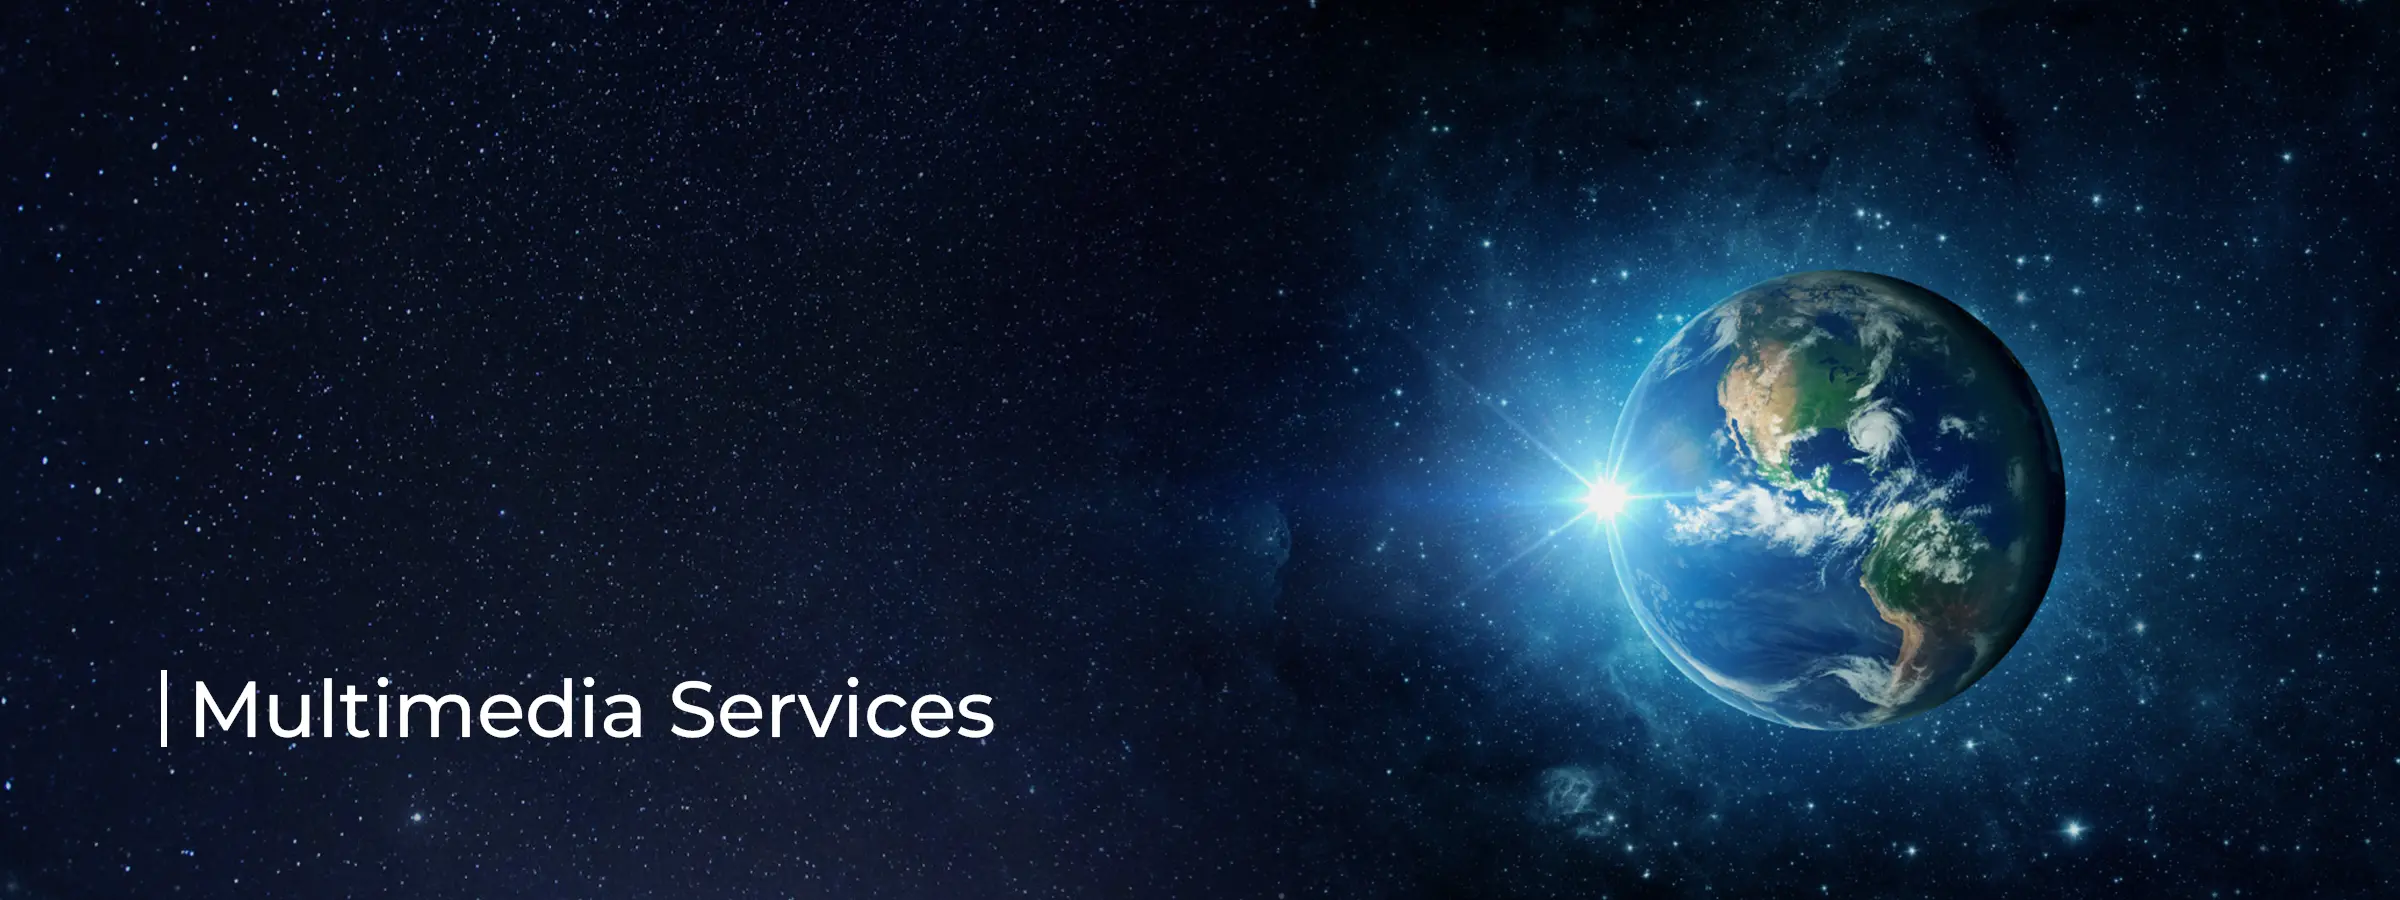 offerings-services-multimedia-banner